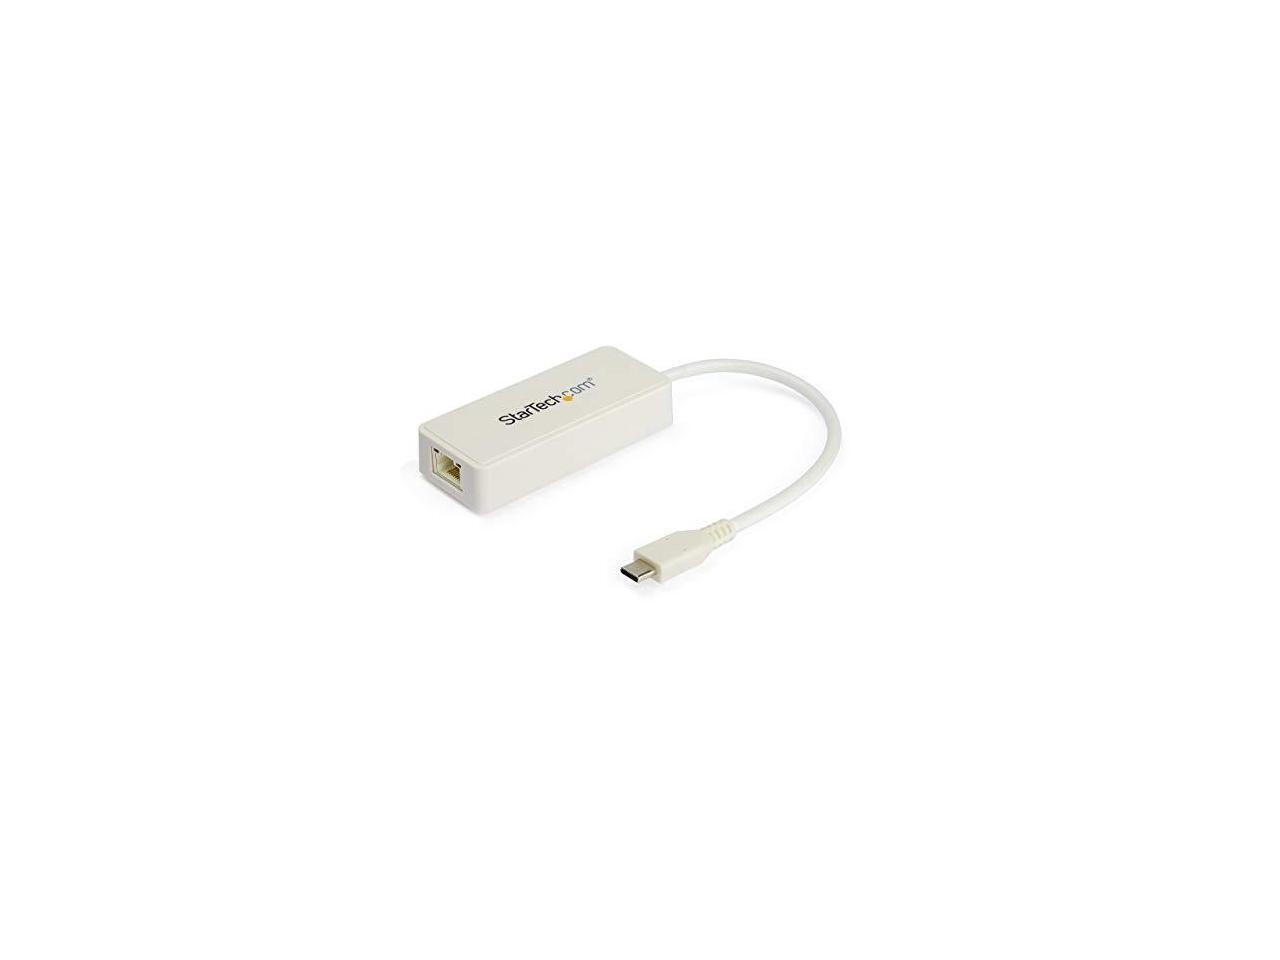 StarTech.com US1GC301AUW USB-C Ethernet Adapter with Extra USB 3.0 Port - White